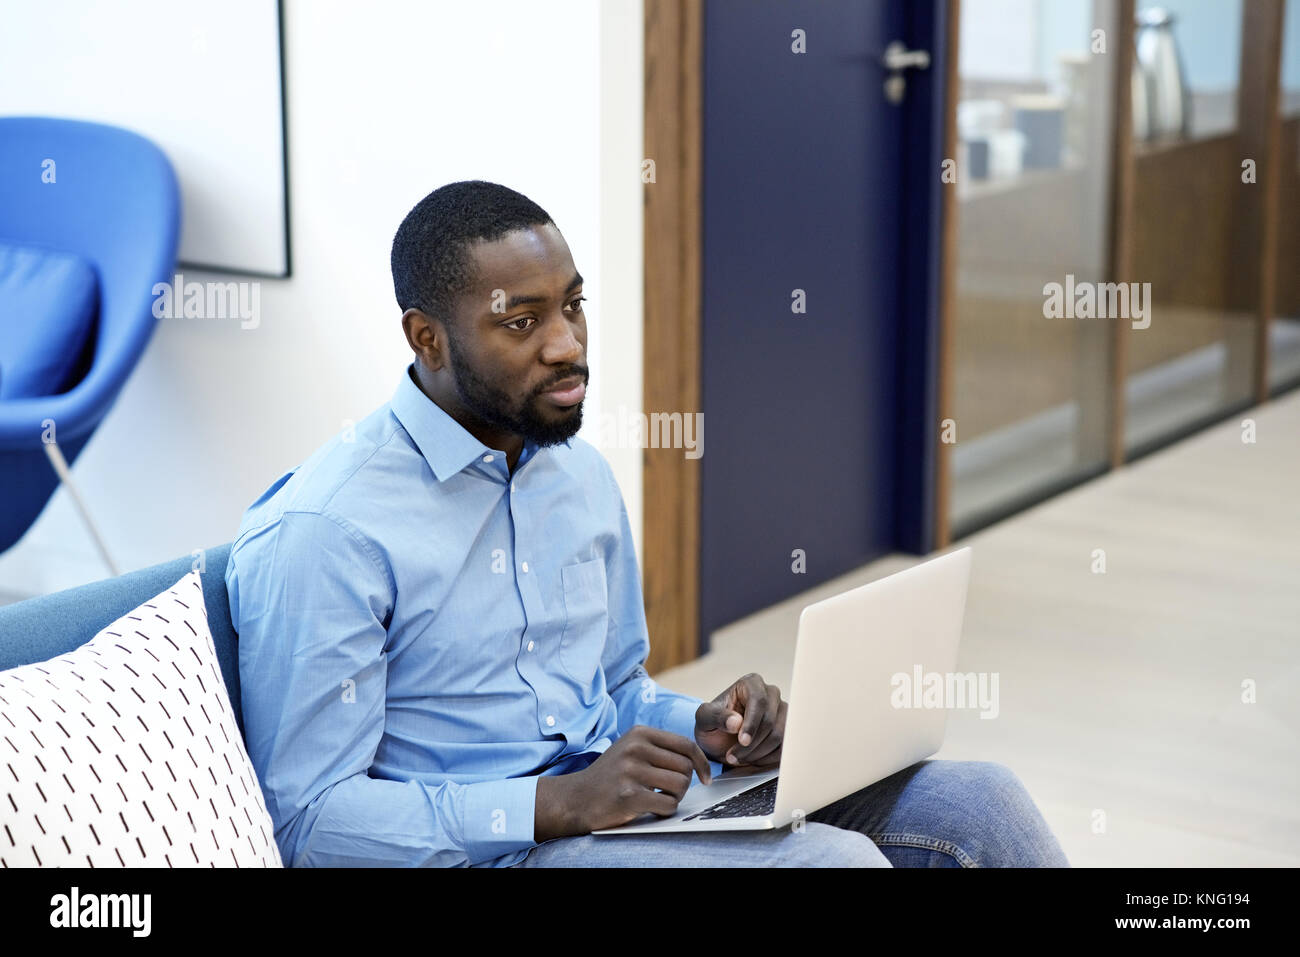 Black male creative professional listening to colleagues and using a laptop during a business meeting in a contemporary office Stock Photo